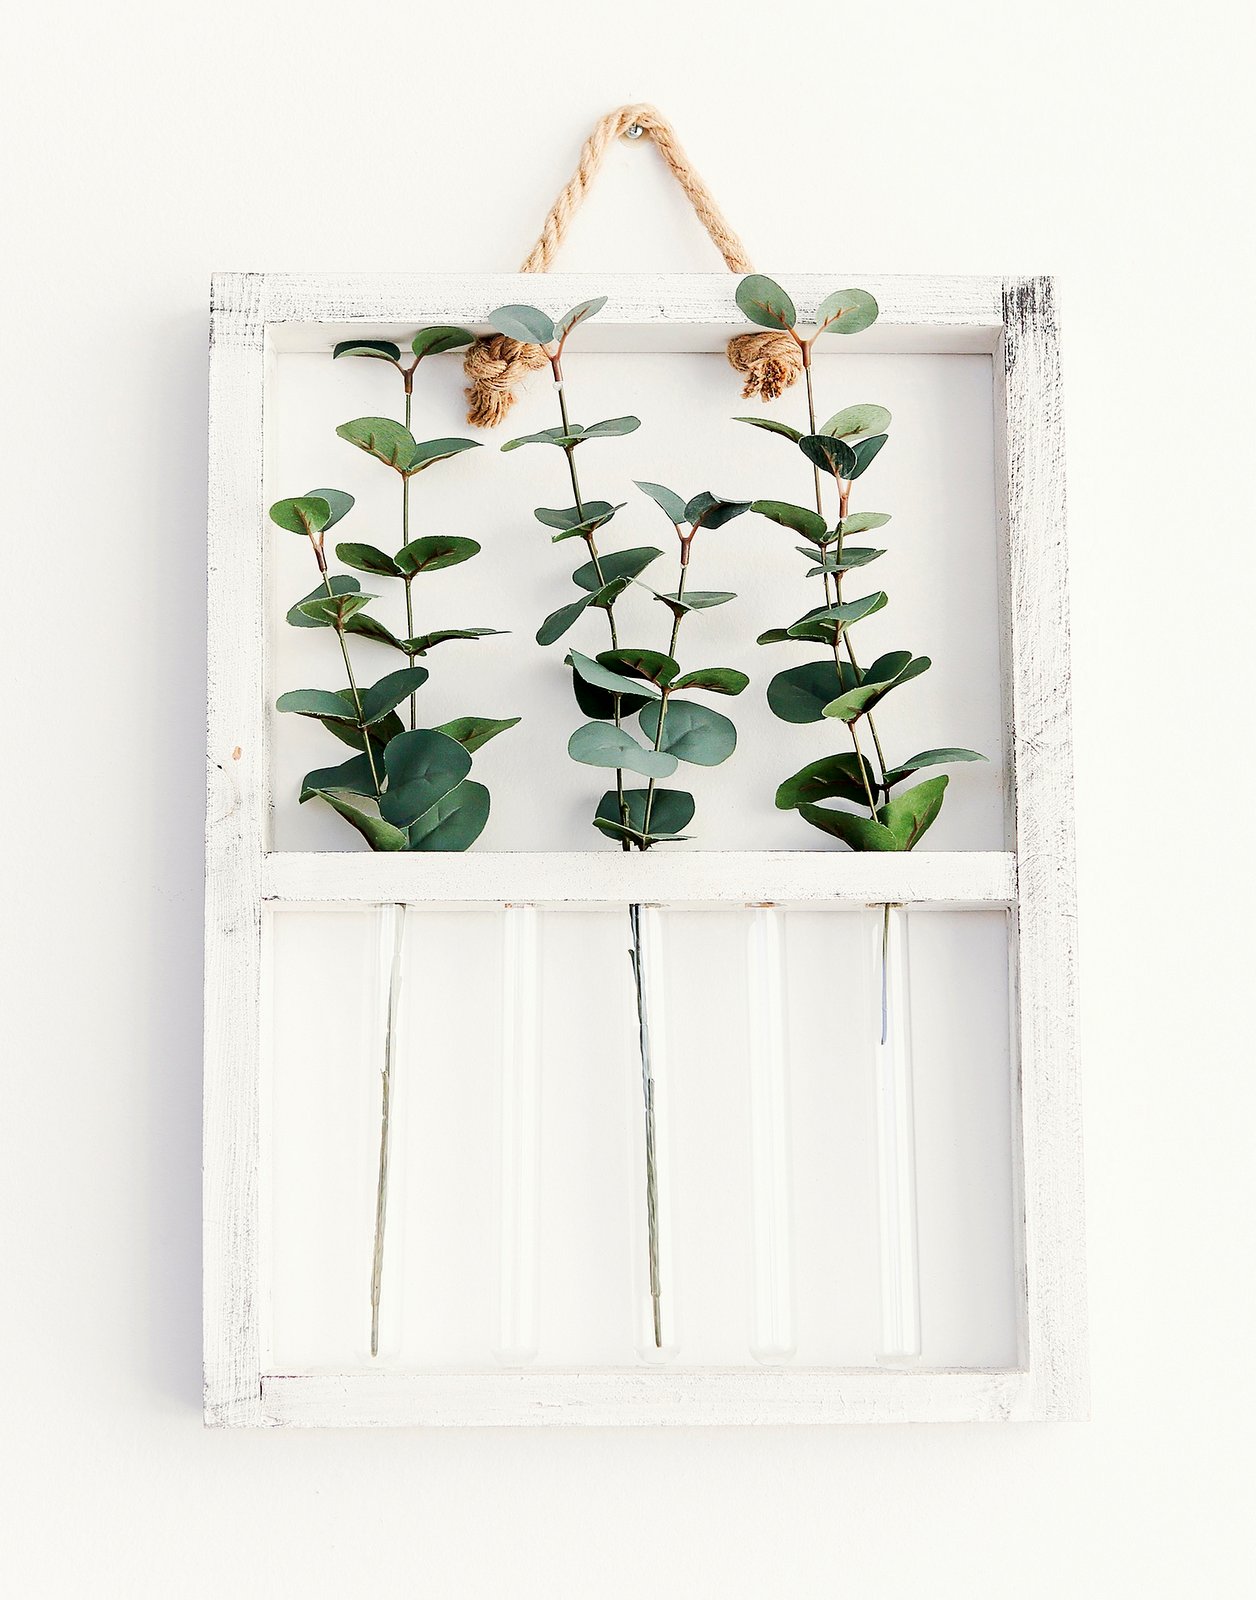 Indoor plants decorating: Small wall-mounted wooden crates with plants